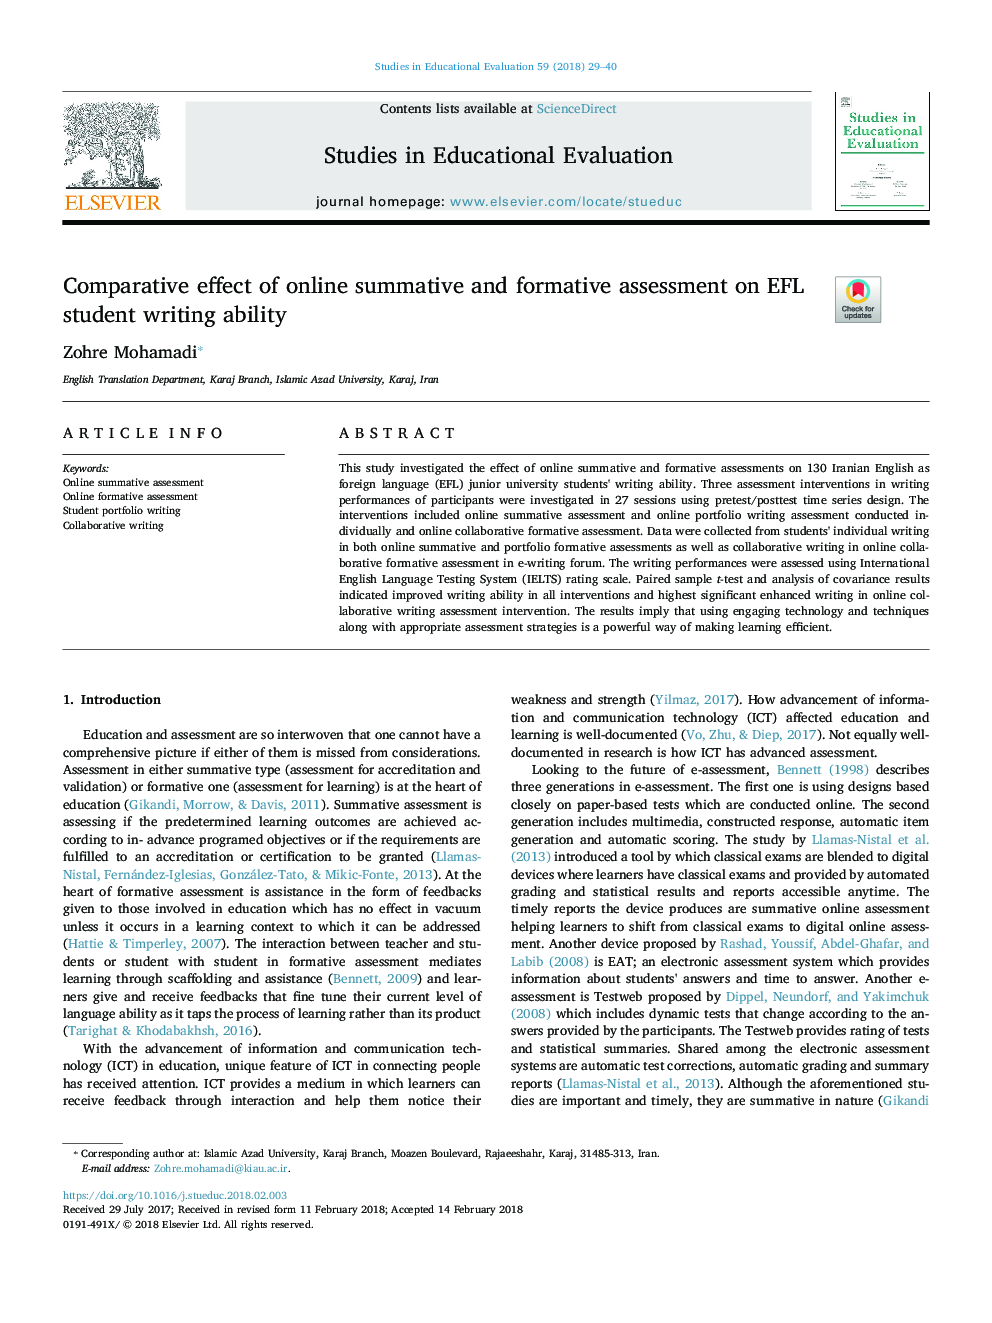 Comparative effect of online summative and formative assessment on EFL student writing ability